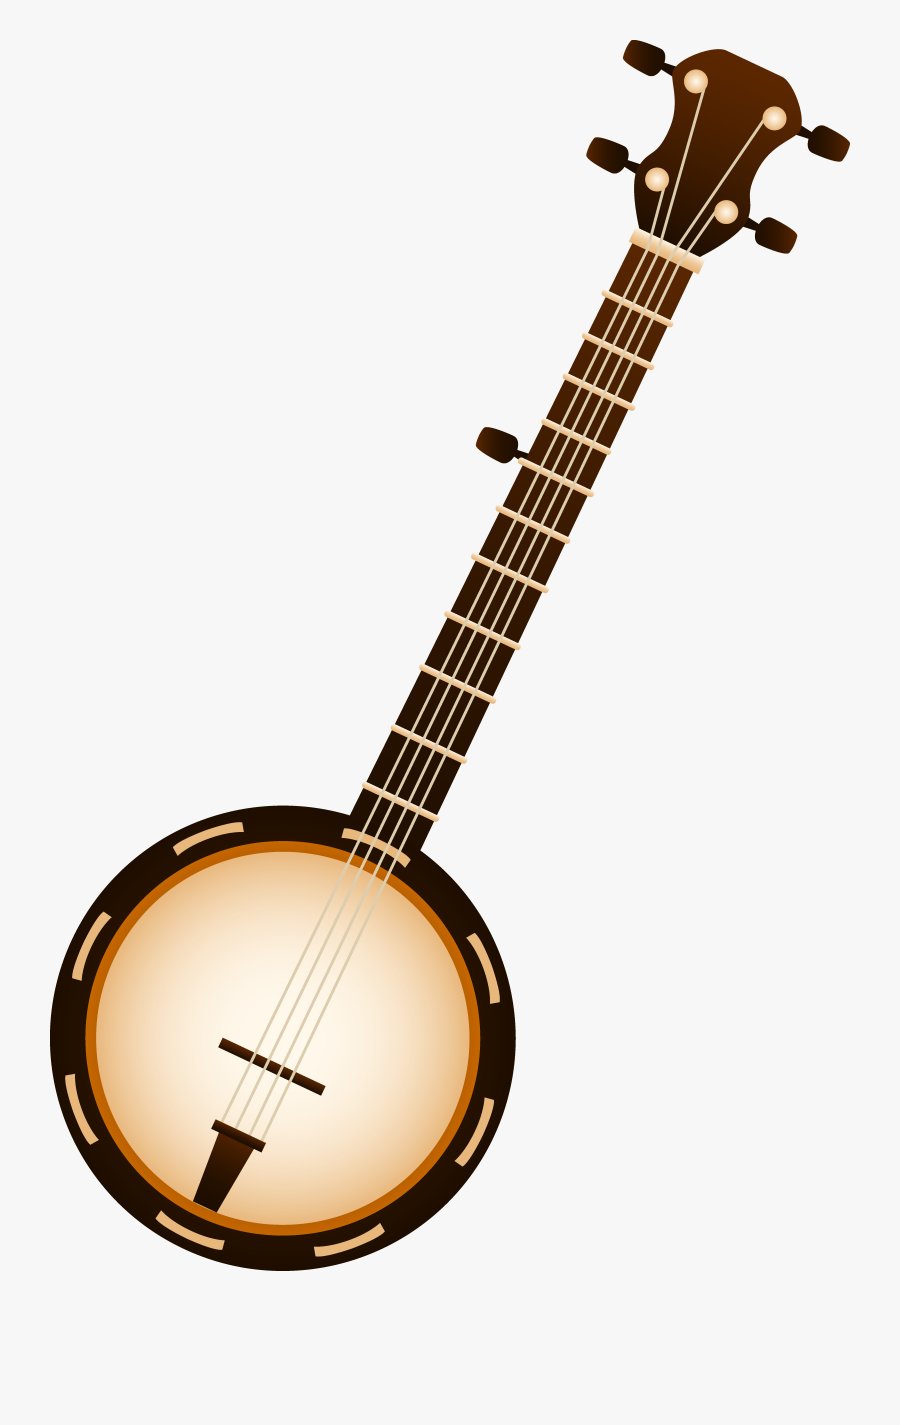 Country Music Clipart Free Clipart Images - Banjo Clipart, Transparent Clipart